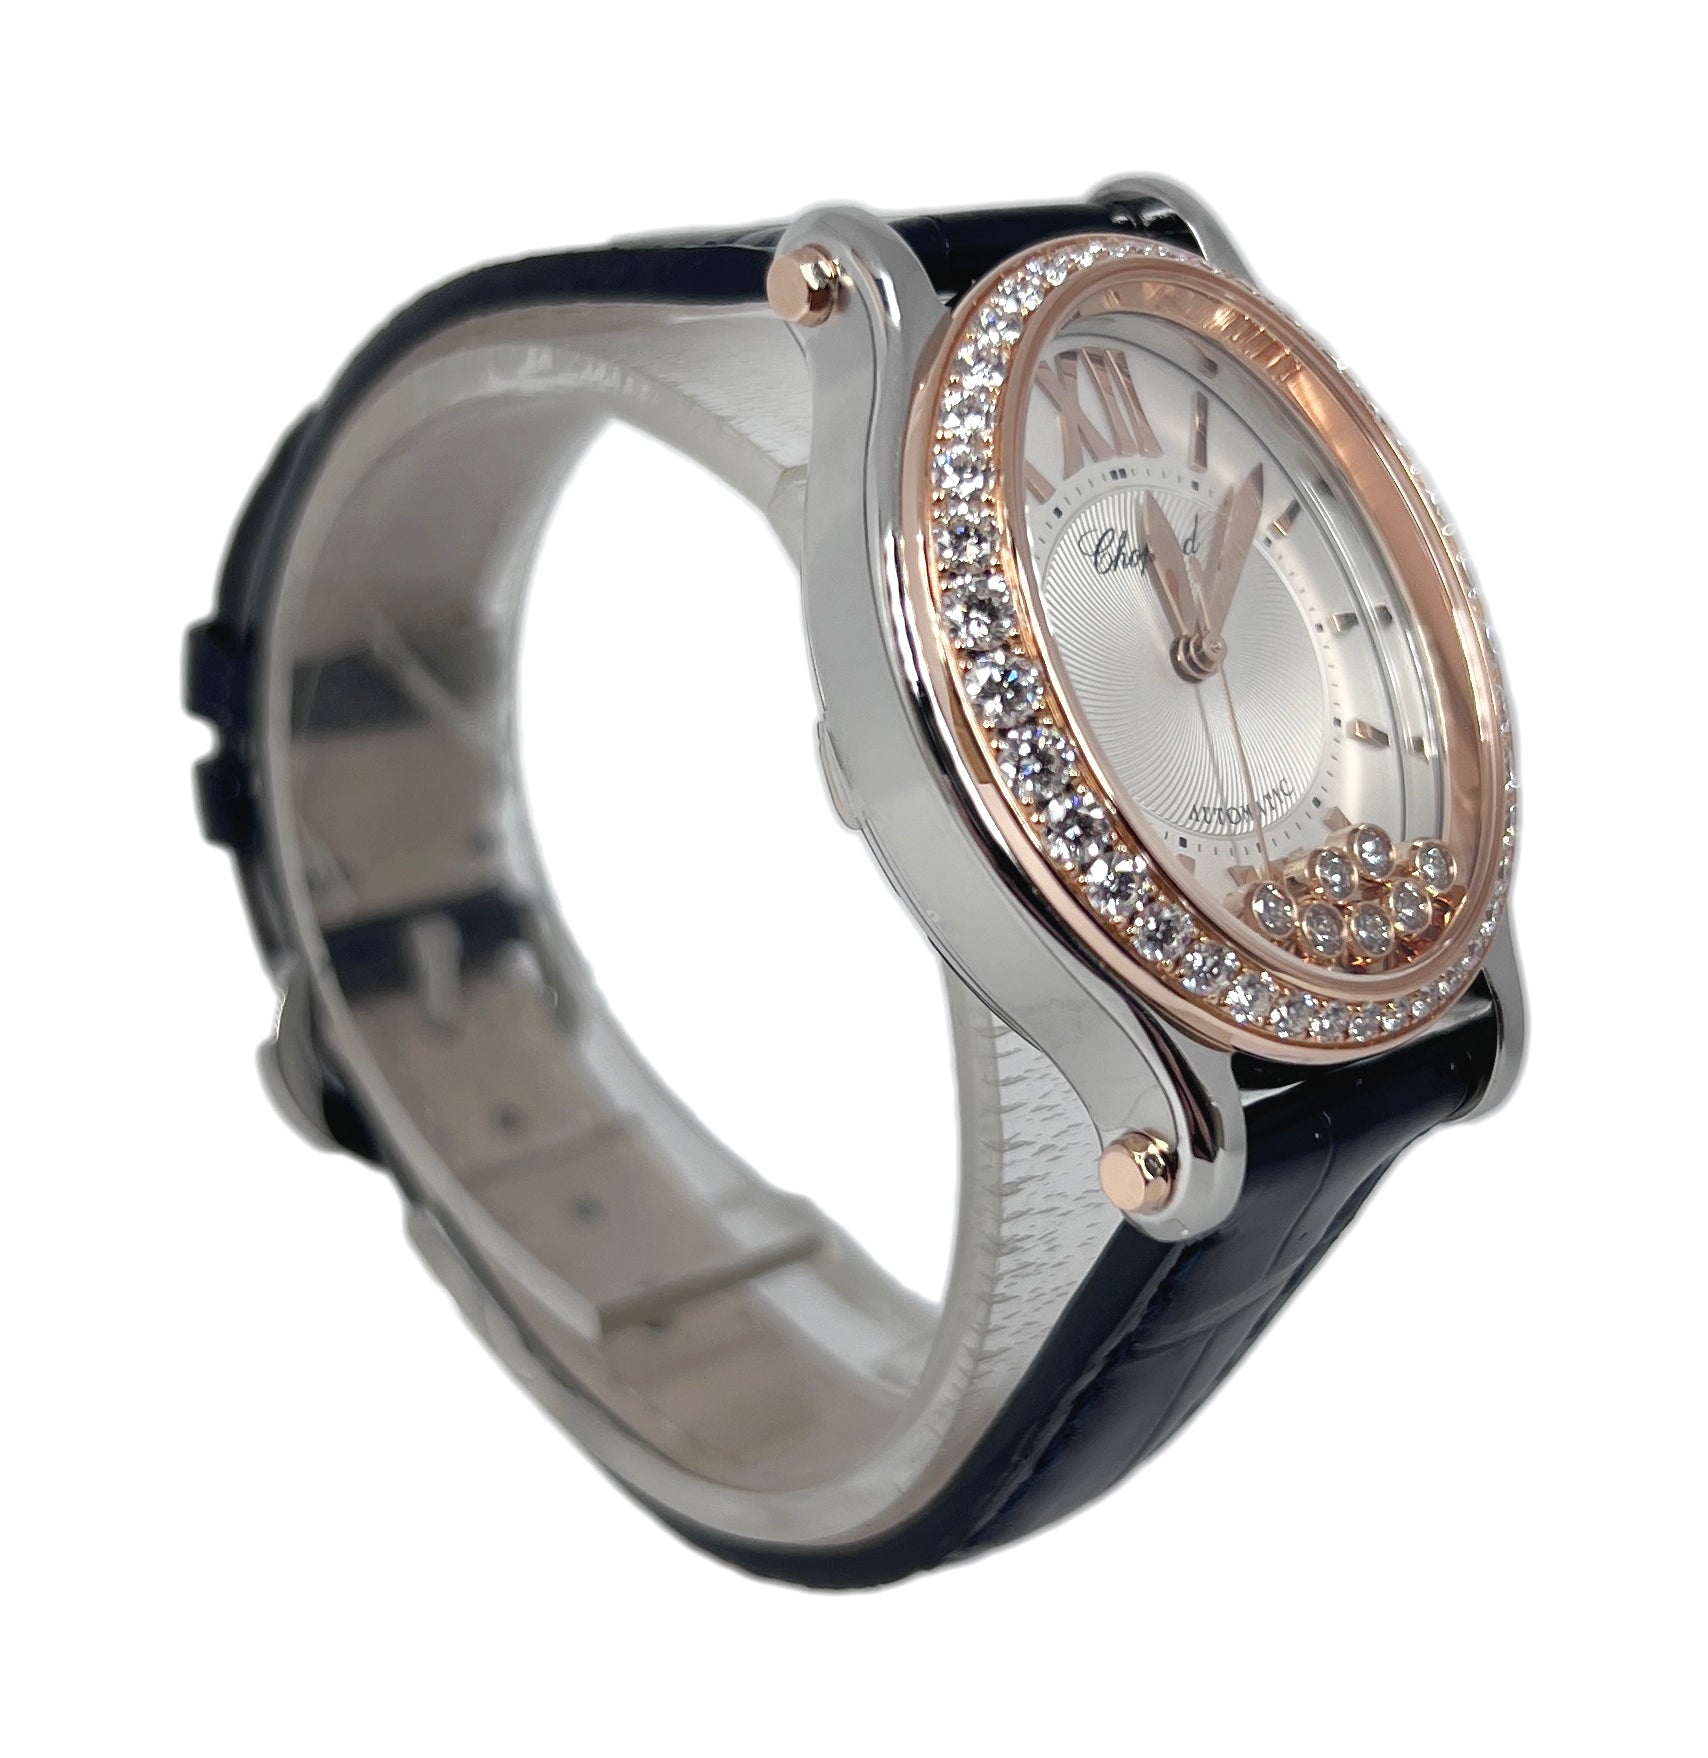 Chopard Happy Sport Oval Stainless Steel and Ethical Rose Gold & Diamonds Ladies Watch